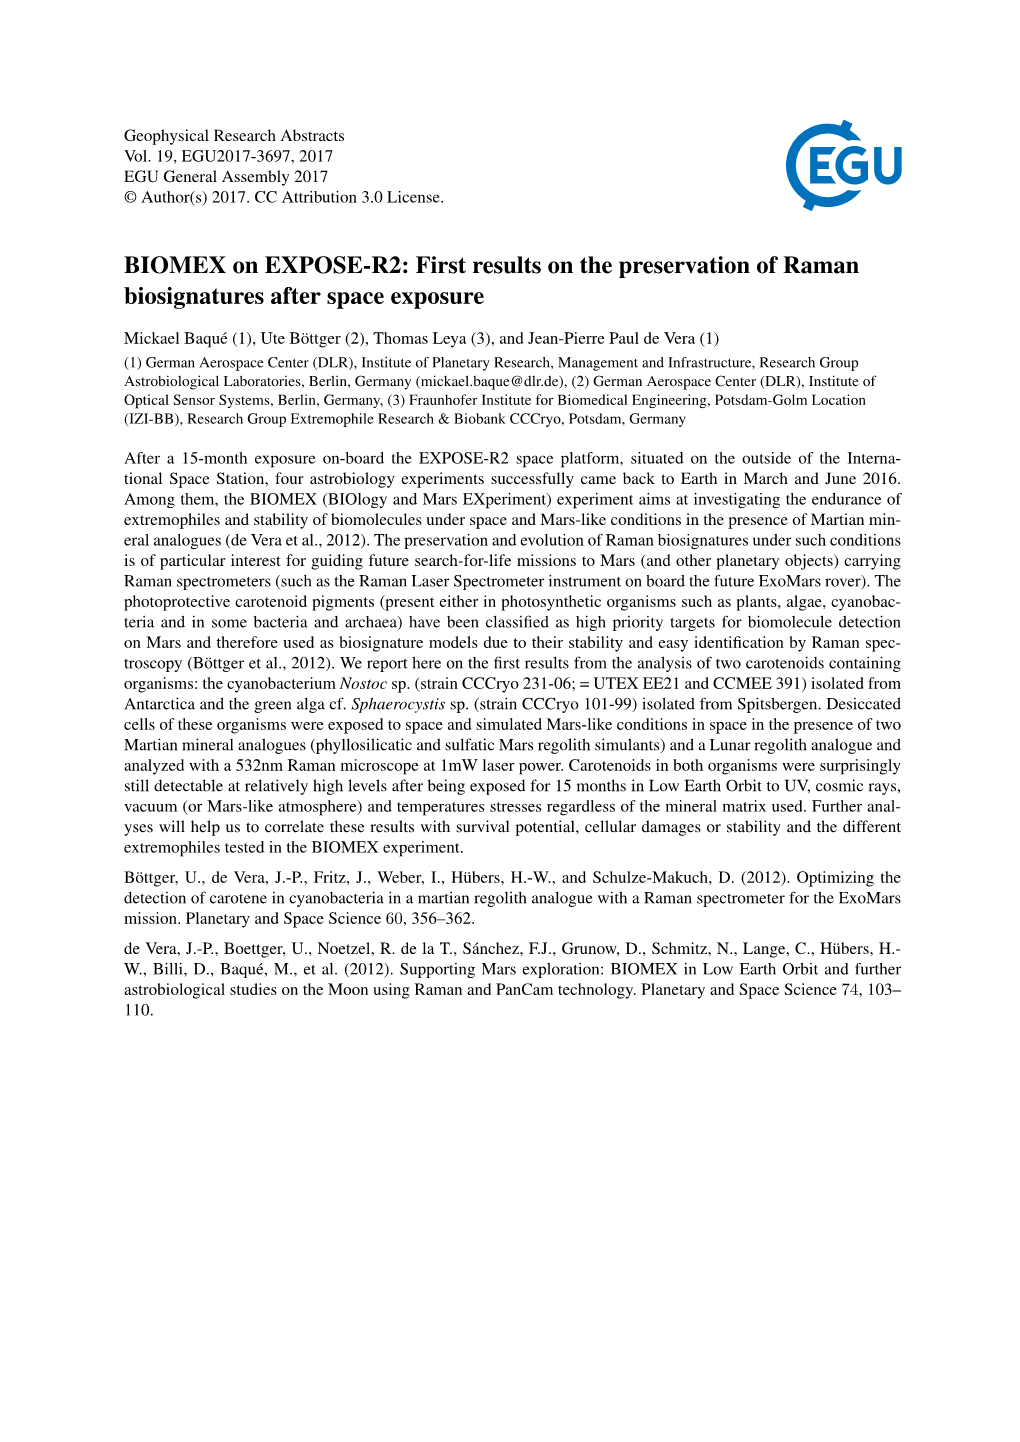 BIOMEX on EXPOSE-R2: First Results on the Preservation of Raman Biosignatures After Space Exposure